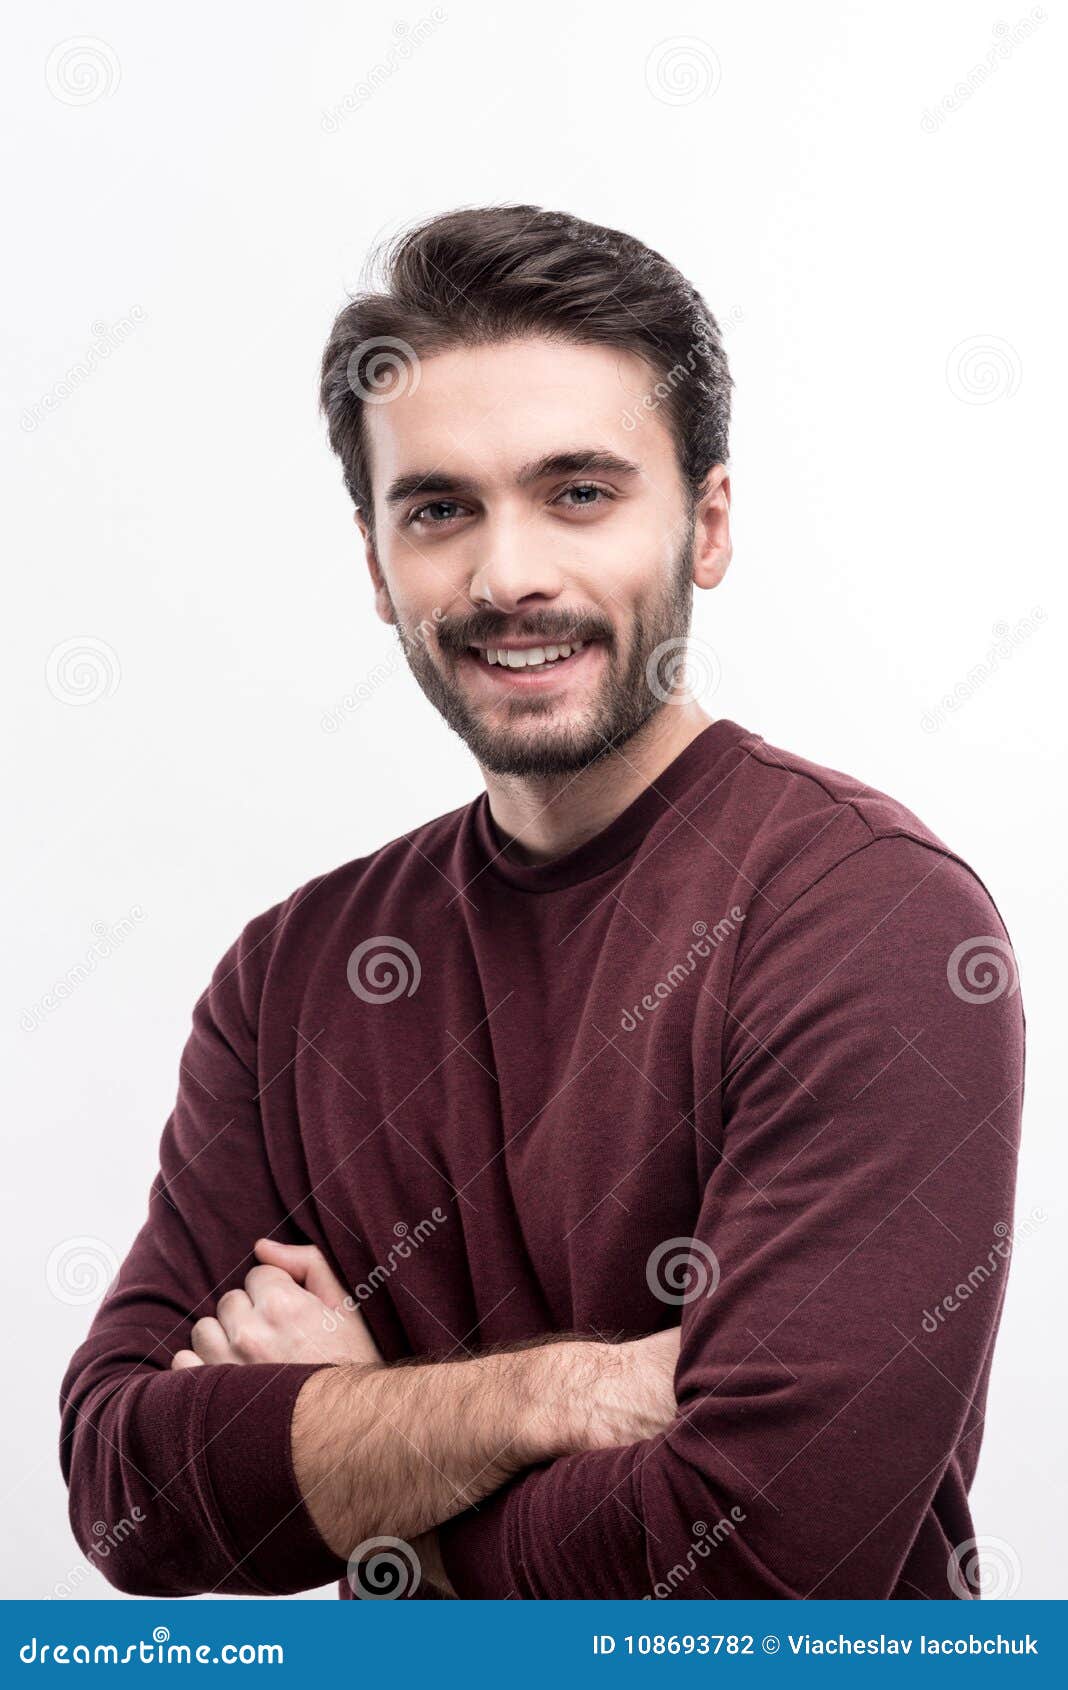 Pleasant Handsome Man Folding Arms Across His Chest Stock Photo - Image ...